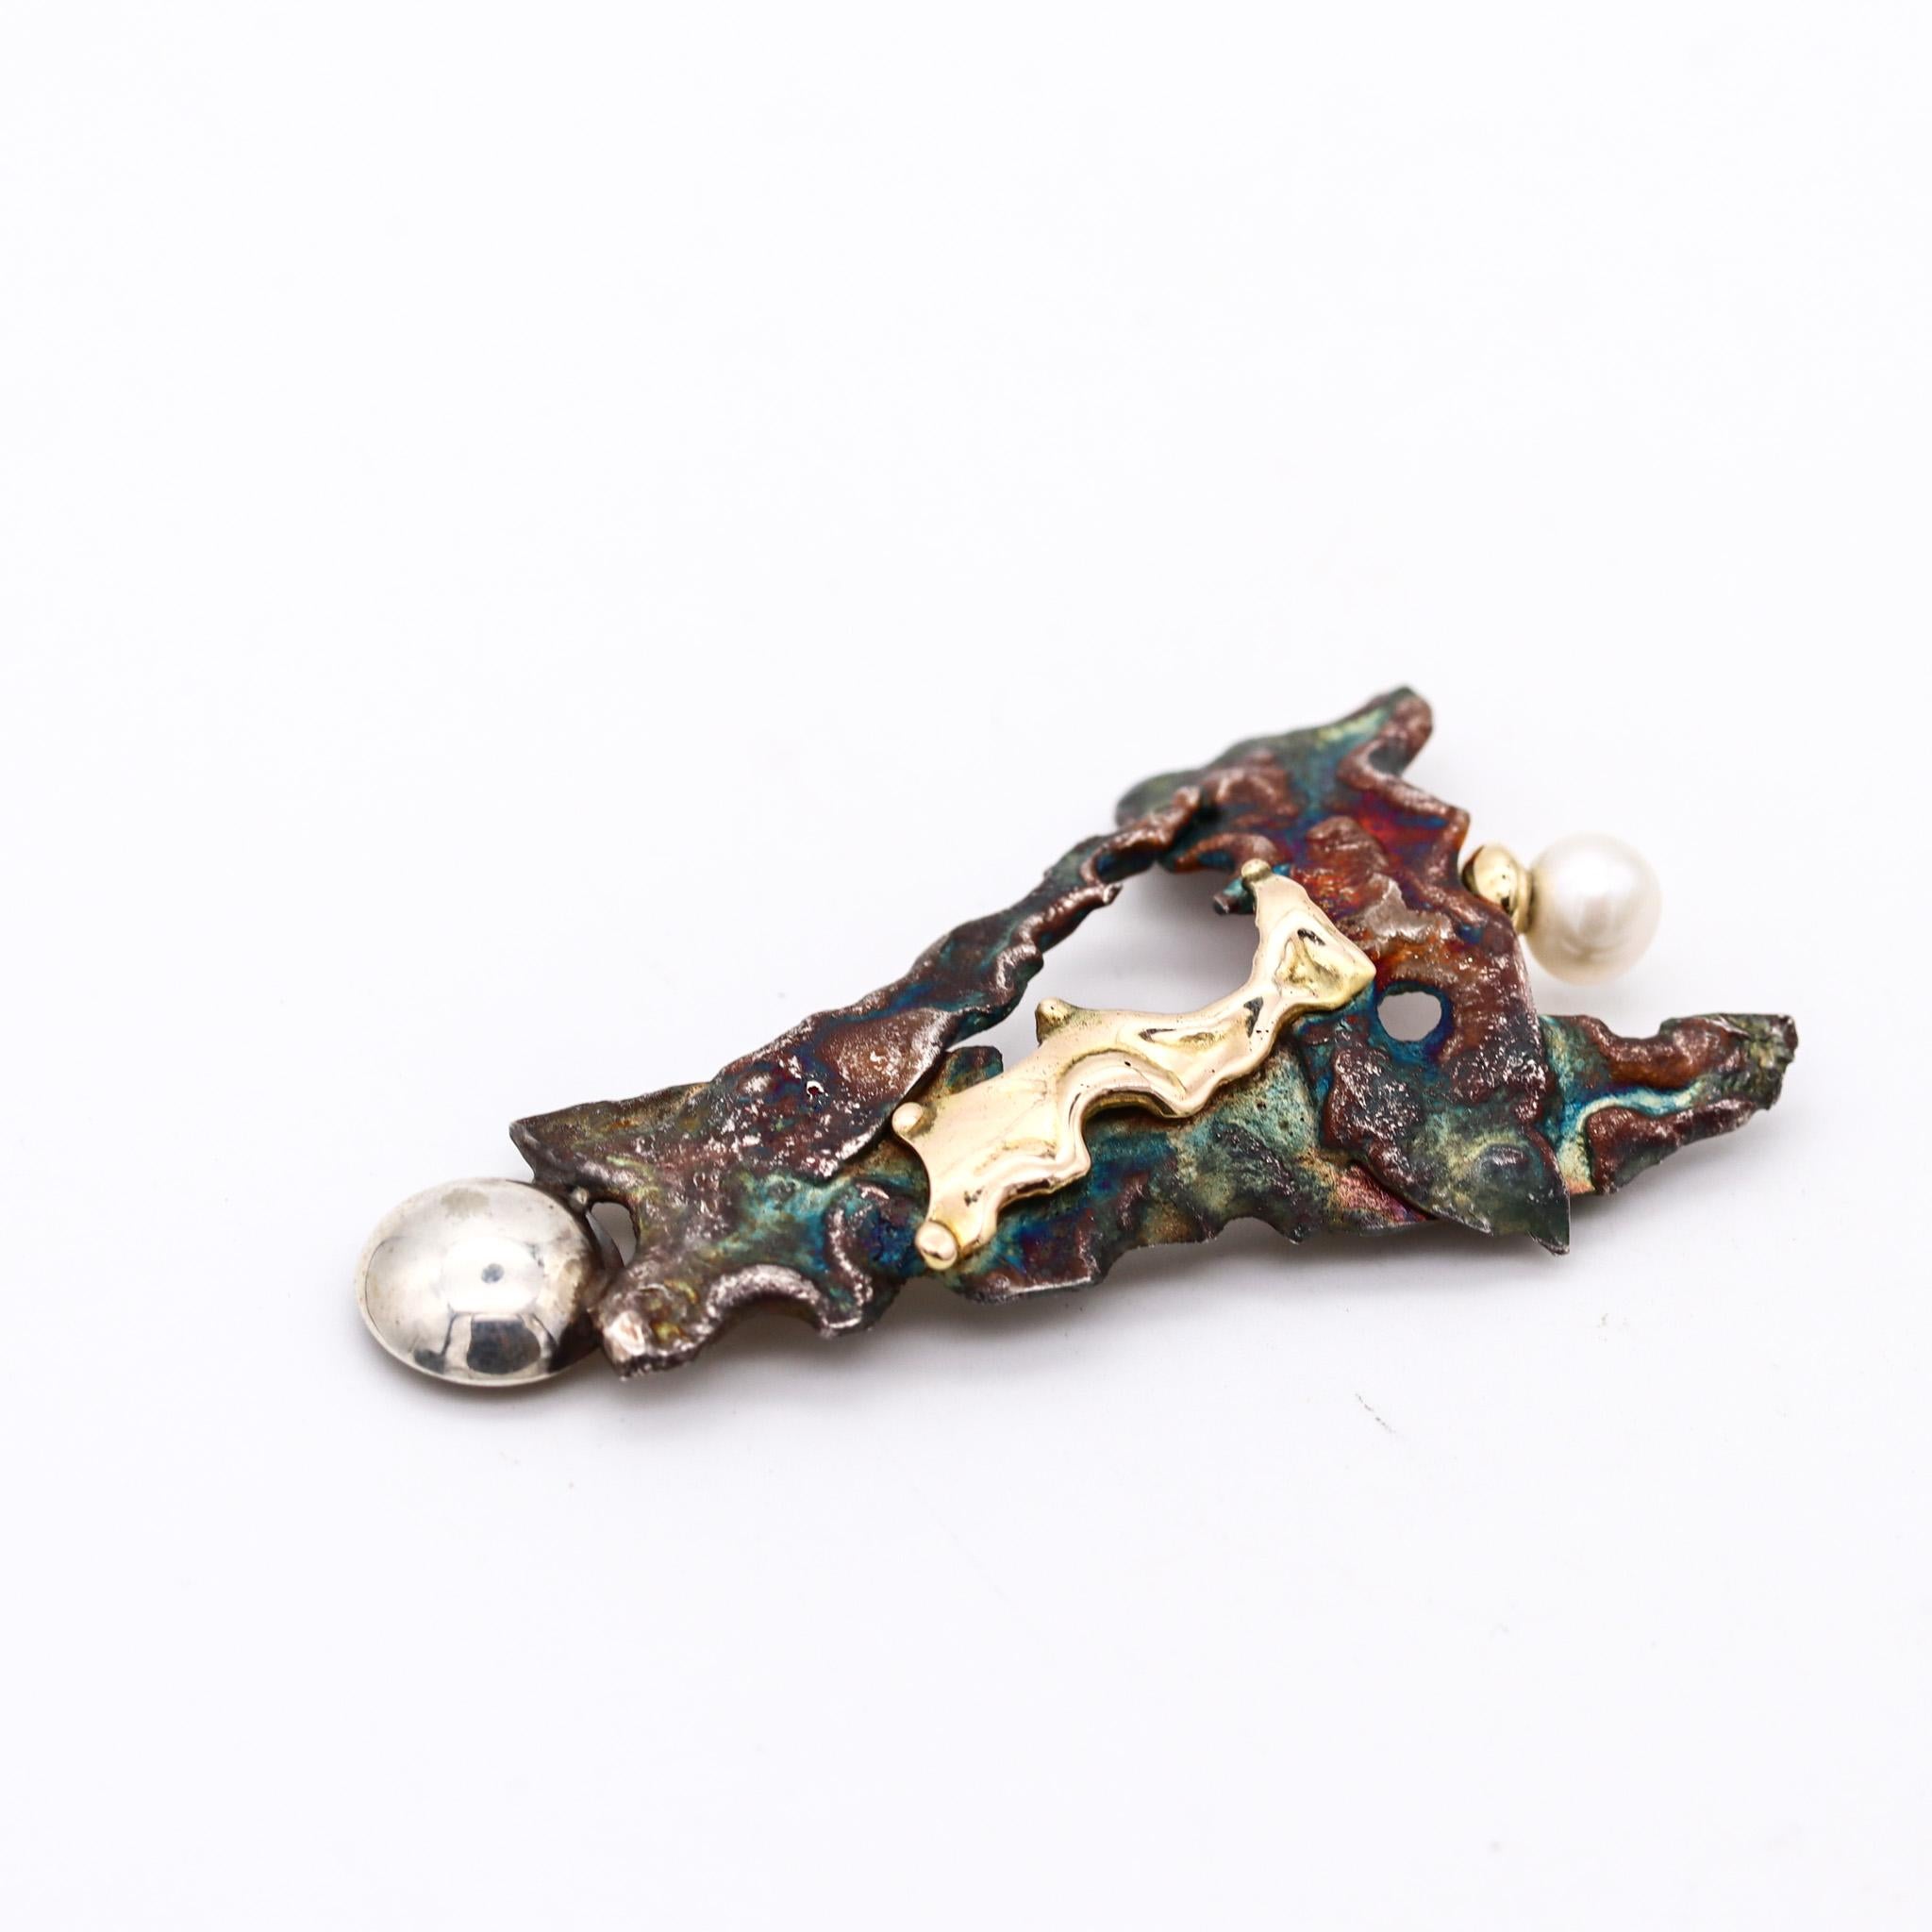 An organic brooch designed by Gilles Maurel.

An intricate organic piece of jewelry, created in Quebec Canada by the artist jewelers Gilles Maurel, back in the late 1980. This brooch has been crafted with organic and free shapes motifs in patinated